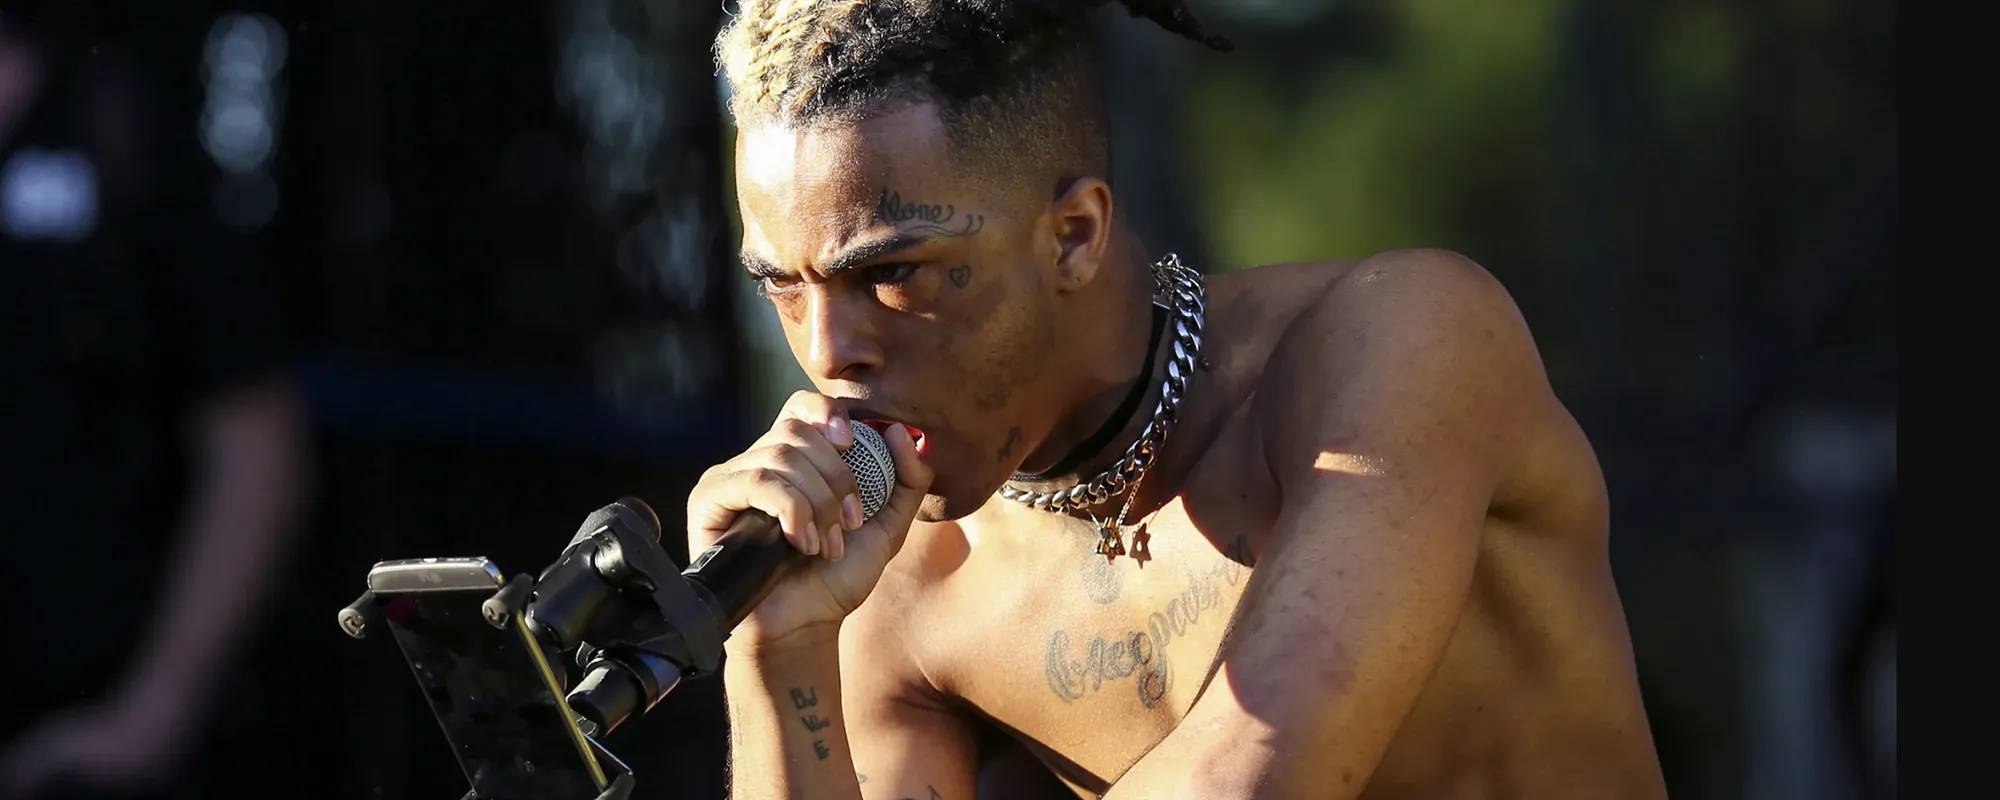 Three Killers of XXXTentacion Found Guilty of Murder and Robbery